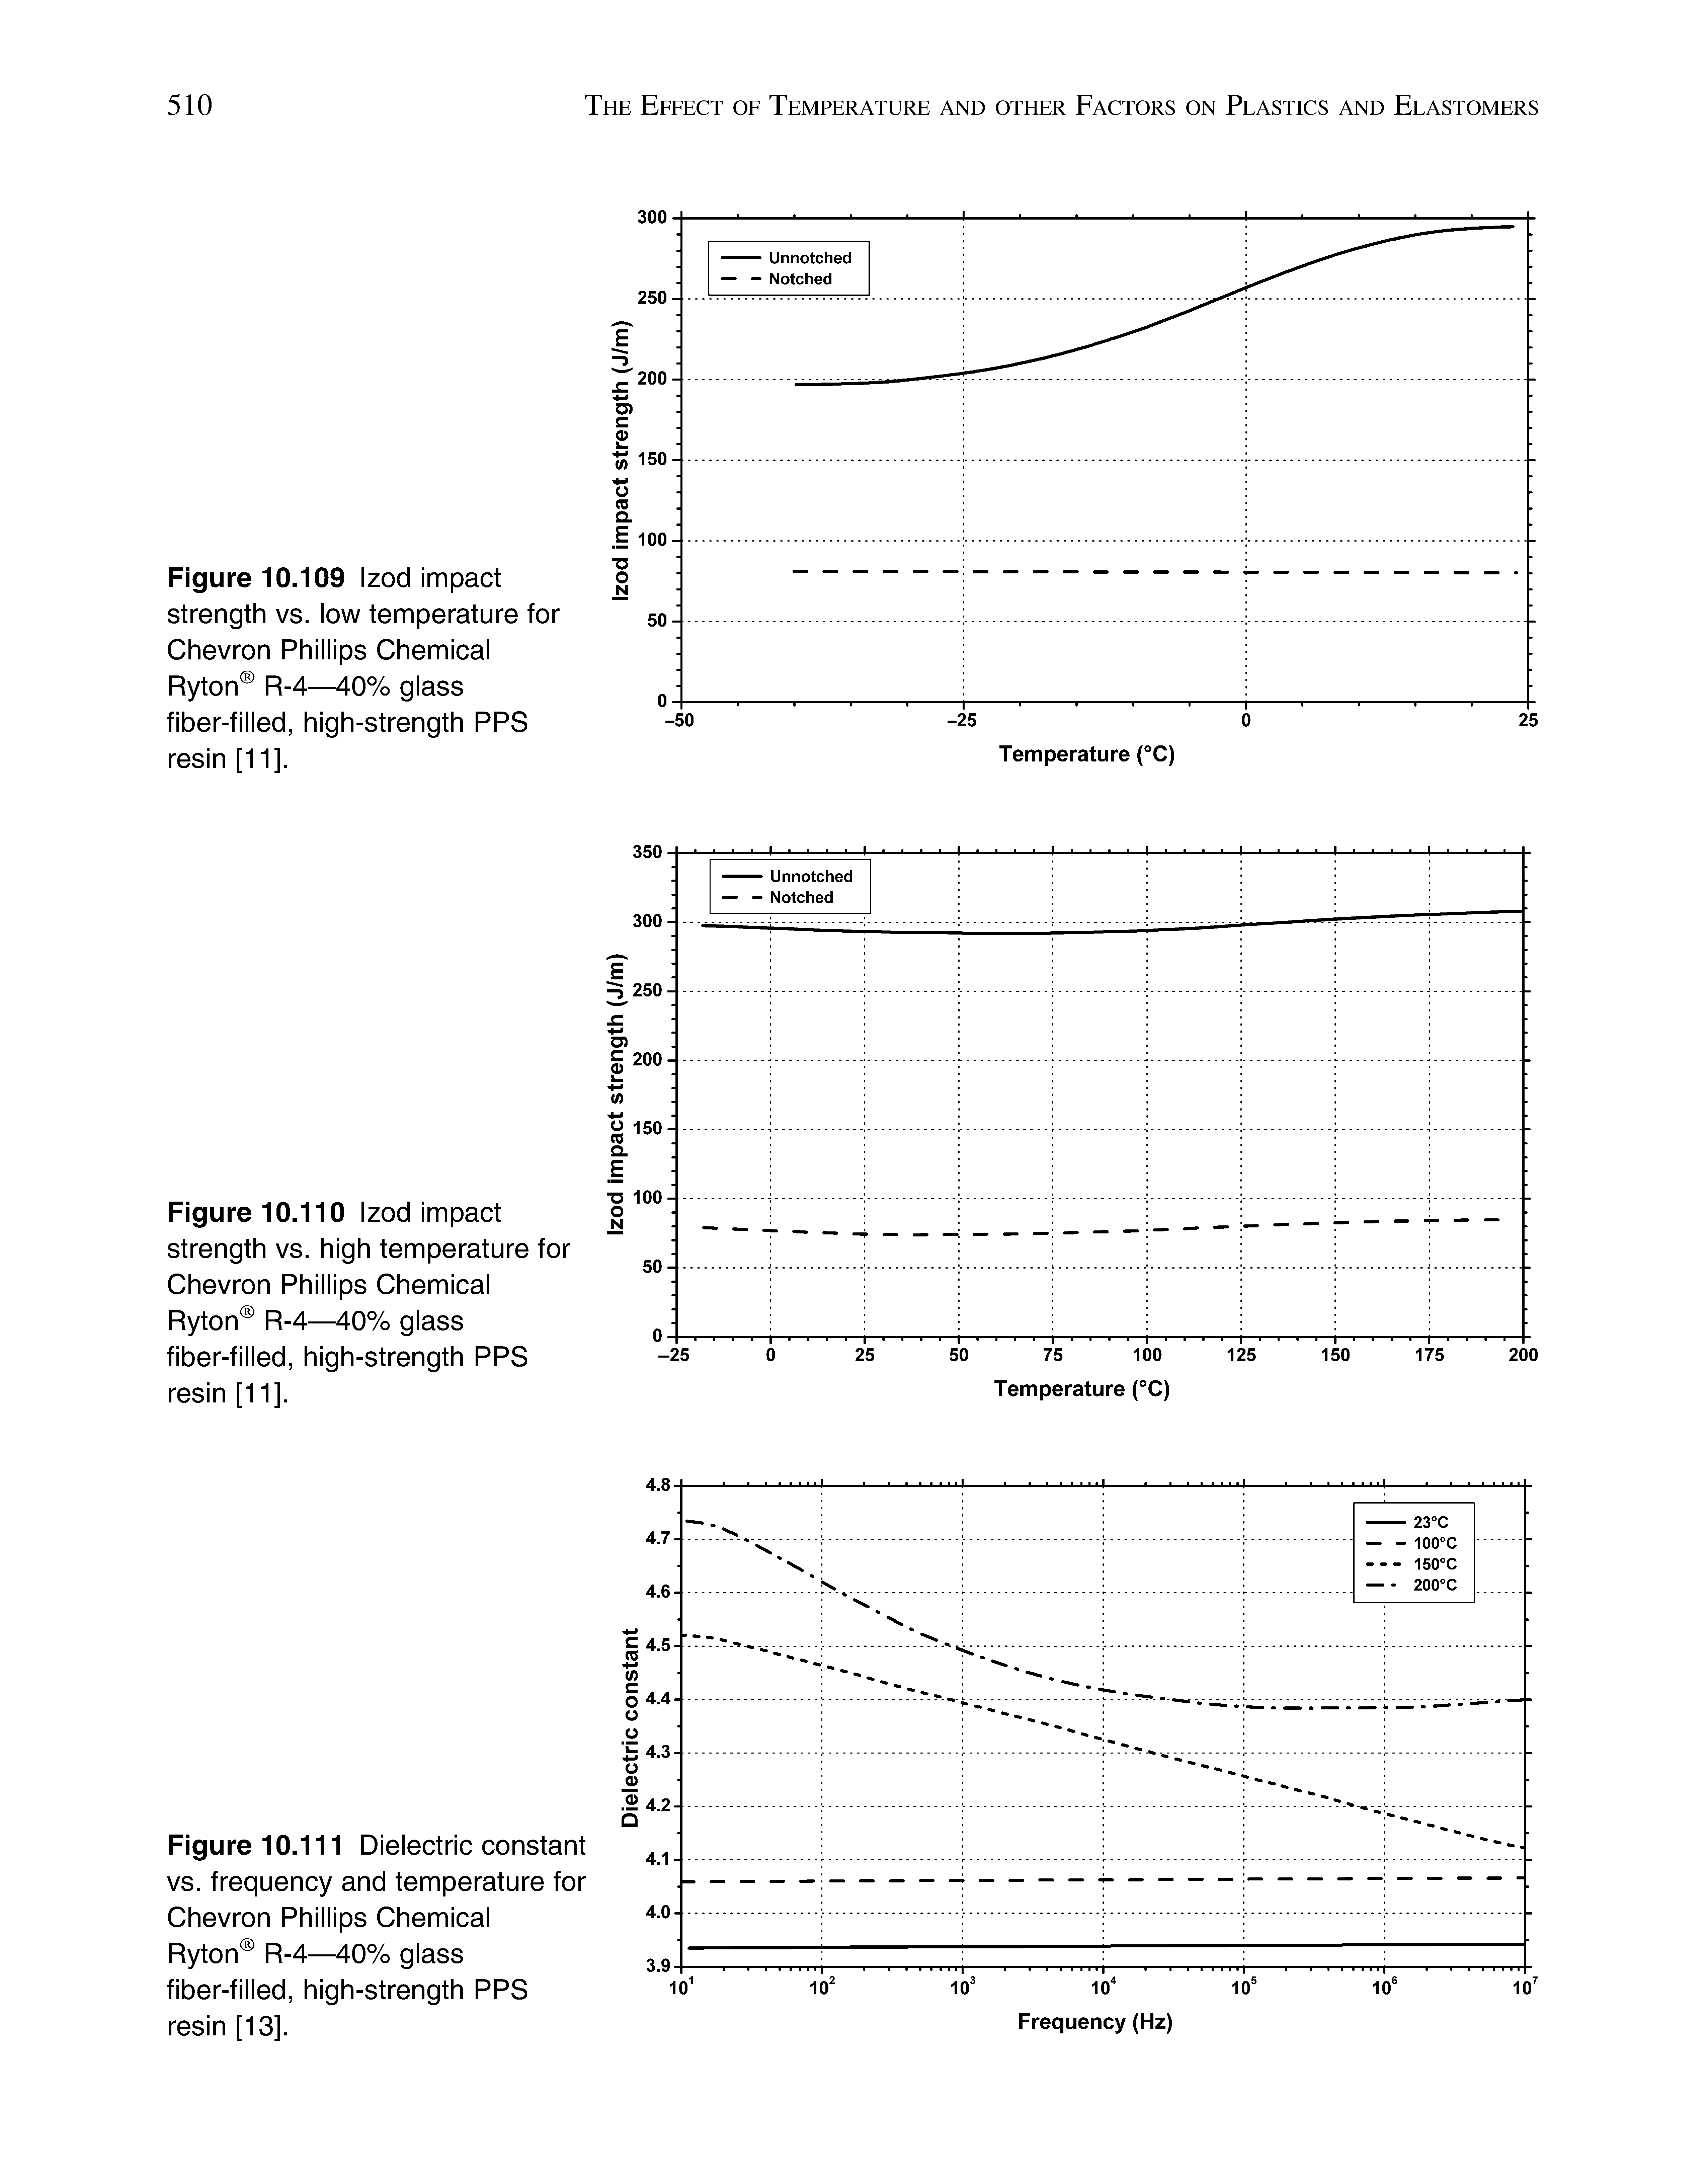 Figure 10.111 Dielectric constant vs. frequency and temperature for Chevron Phillips Chemical Ryton R-4—40% glass fiber-filled, high-strength PPS resin [13].